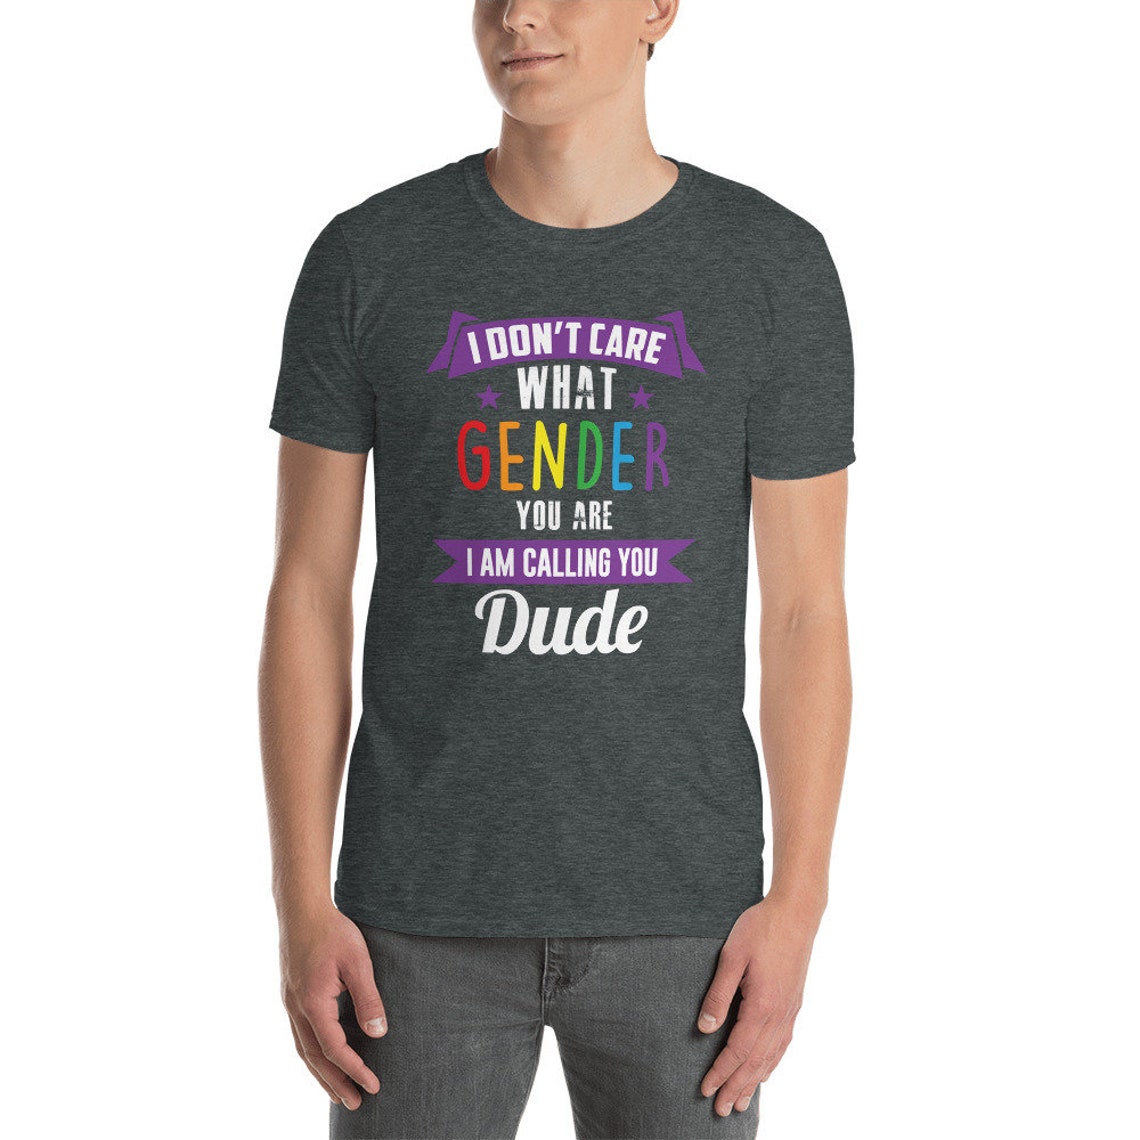 I Don't Care What Gender You Are I'm Calling You Dude | Etsy